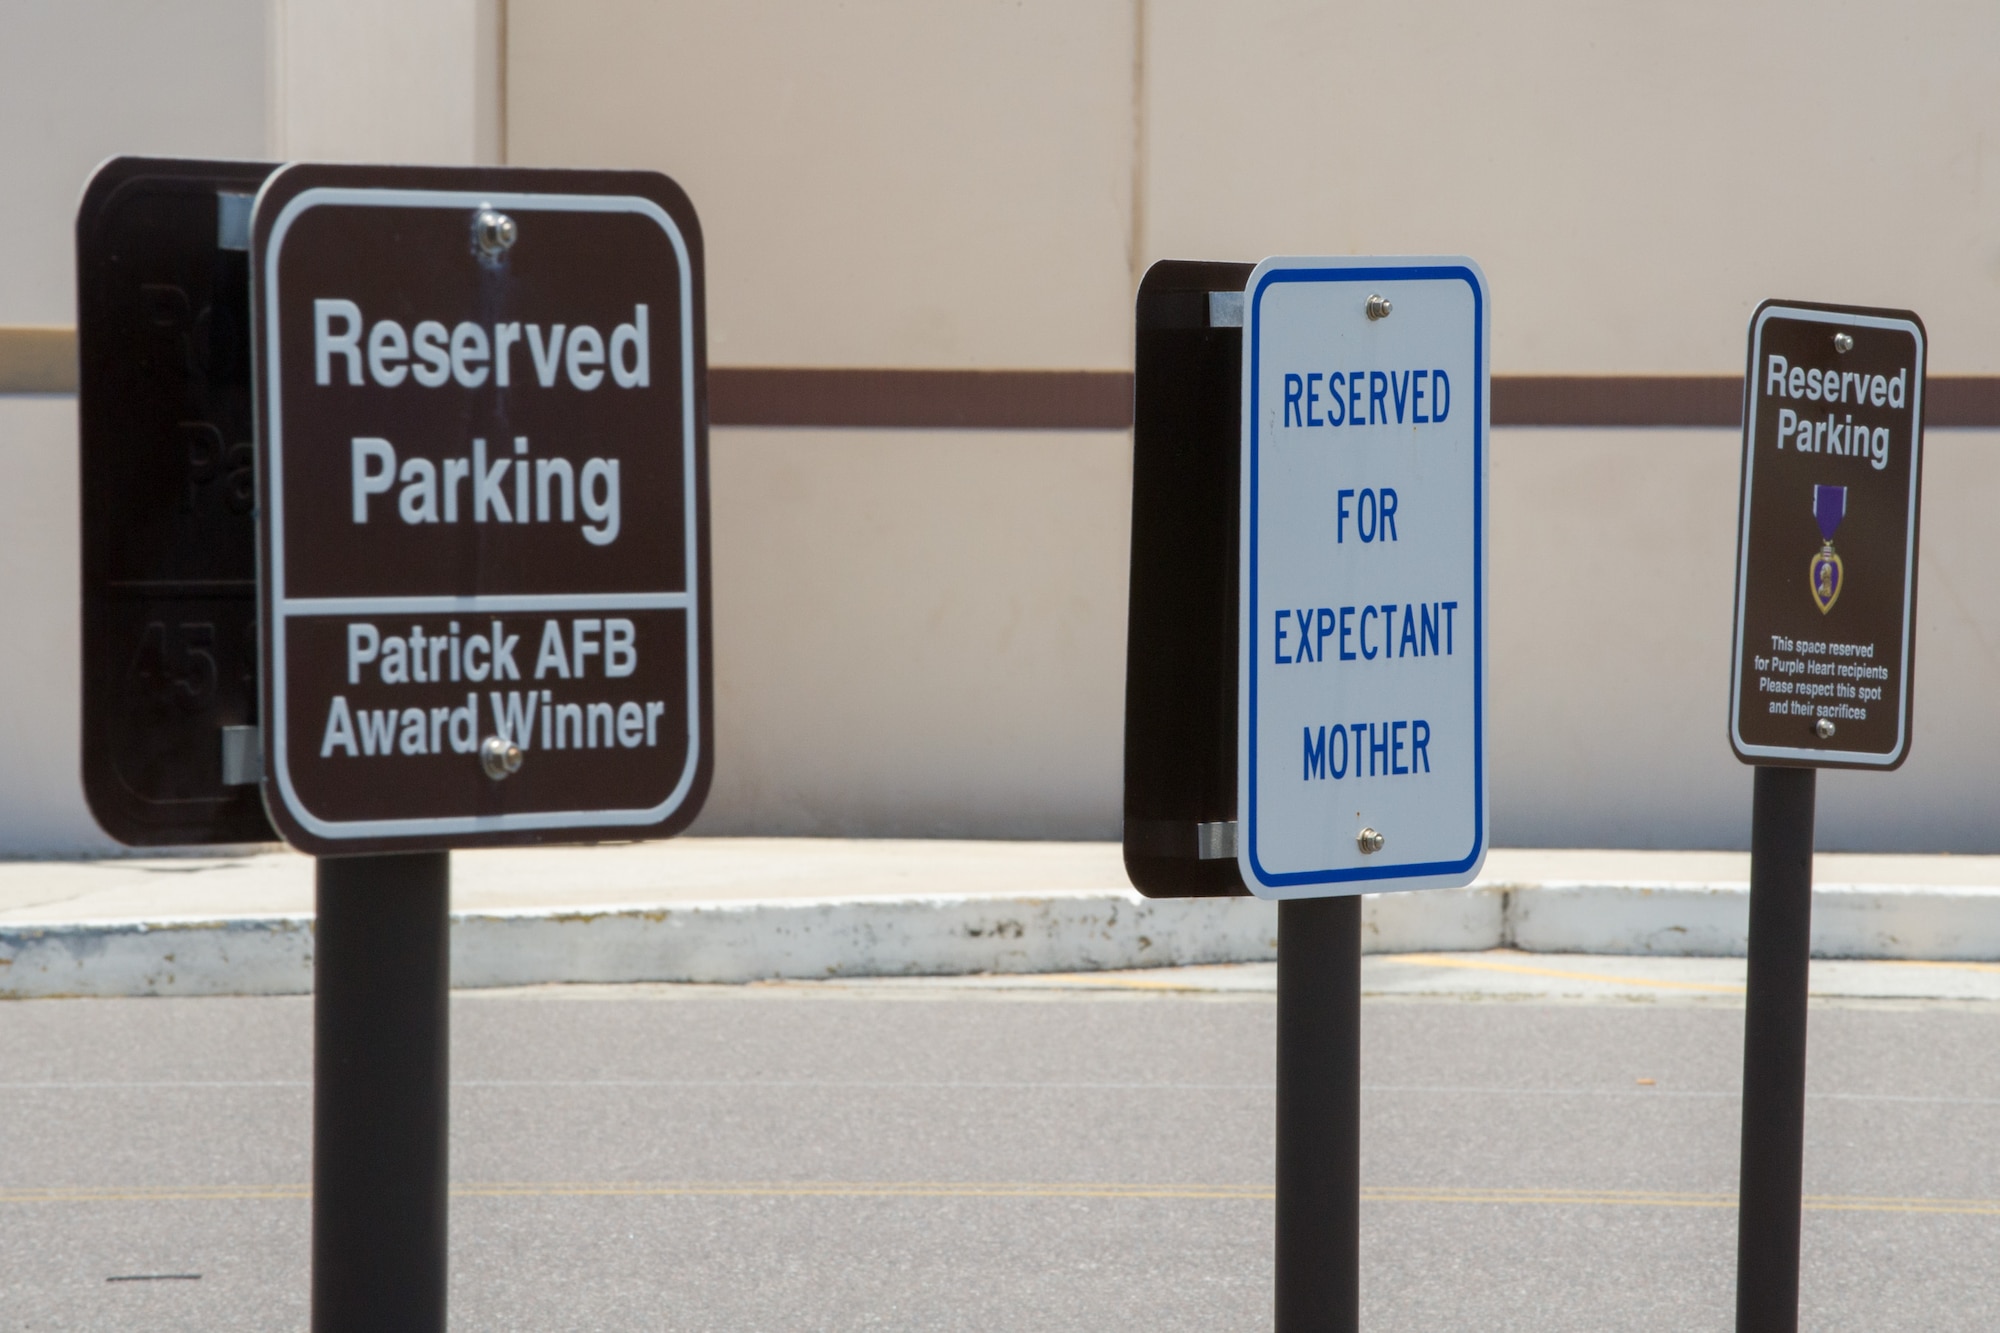 Changes to reserved parking across the installation have materialized over the past three months. In that time, the 45th Civil Engineer Squadron has removed, installed or modified more than 750 reserved parking signs at Patrick Air Force Base and Cape Canaveral Air Force Station, Fla. The changes reflect Brig. Gen. Wayne Monteith, 45th Space Wing commander's vision of what reserved parking should look like on the base. (U.S. Air Force photo/Benjamin Thacker/Released) 